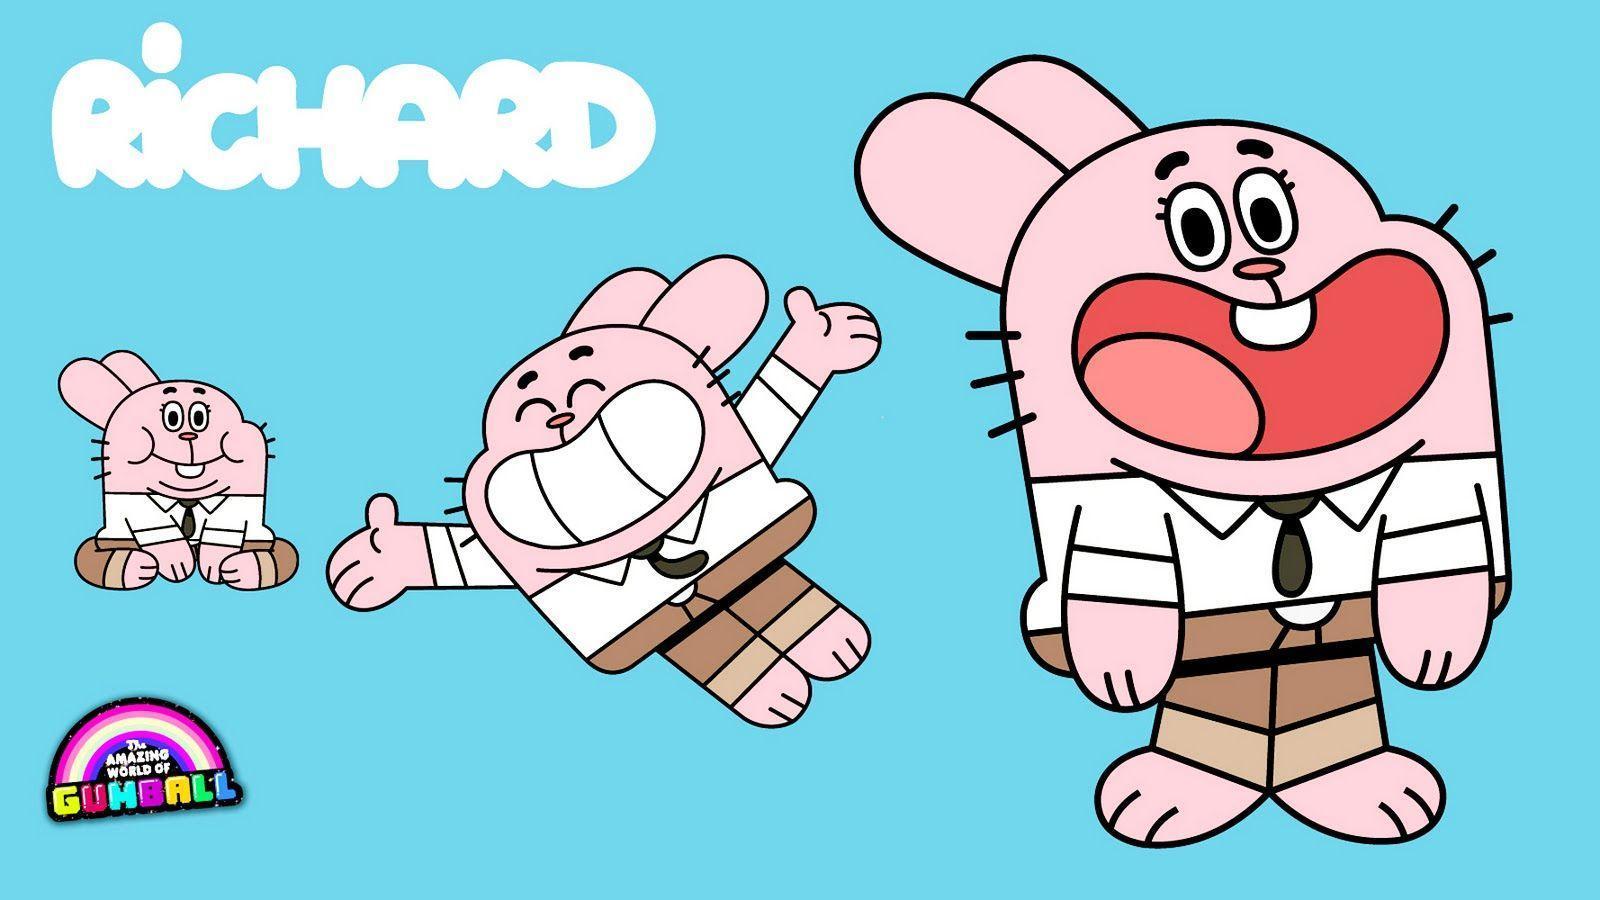 image about Amazing world of gumball. Funny